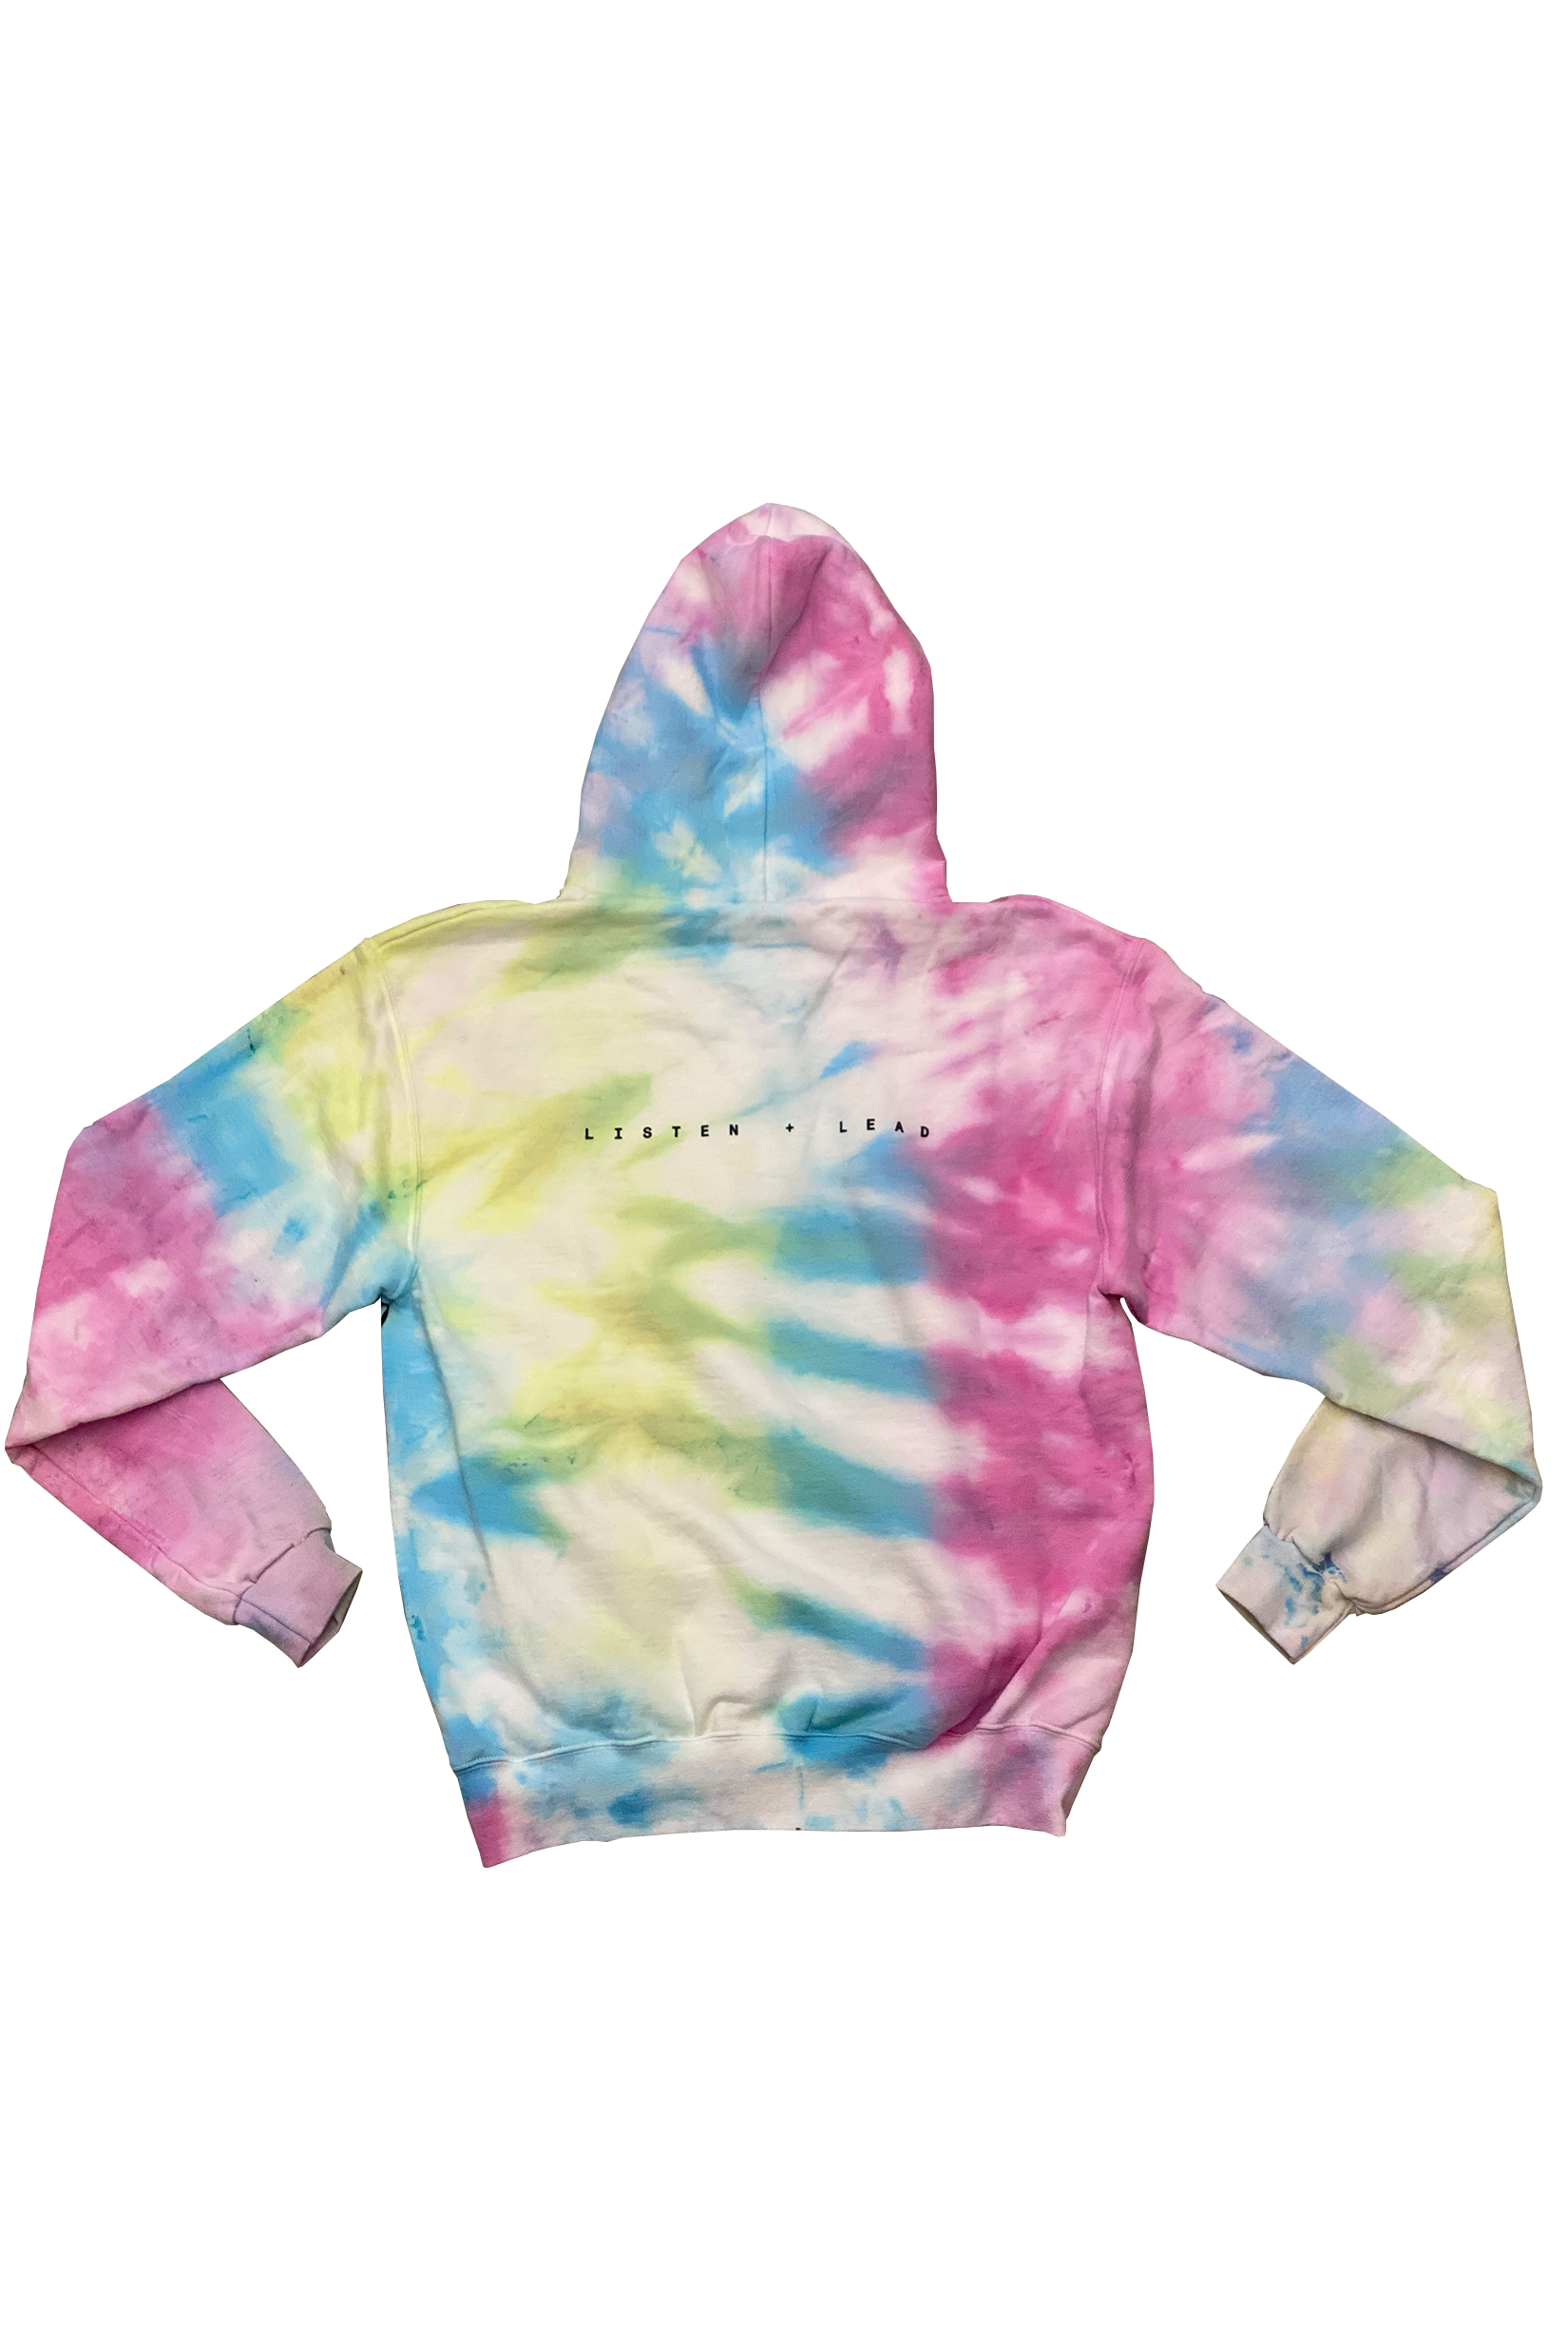 MADE TO ORDER, HAND DYED TIE DYE HOODIE